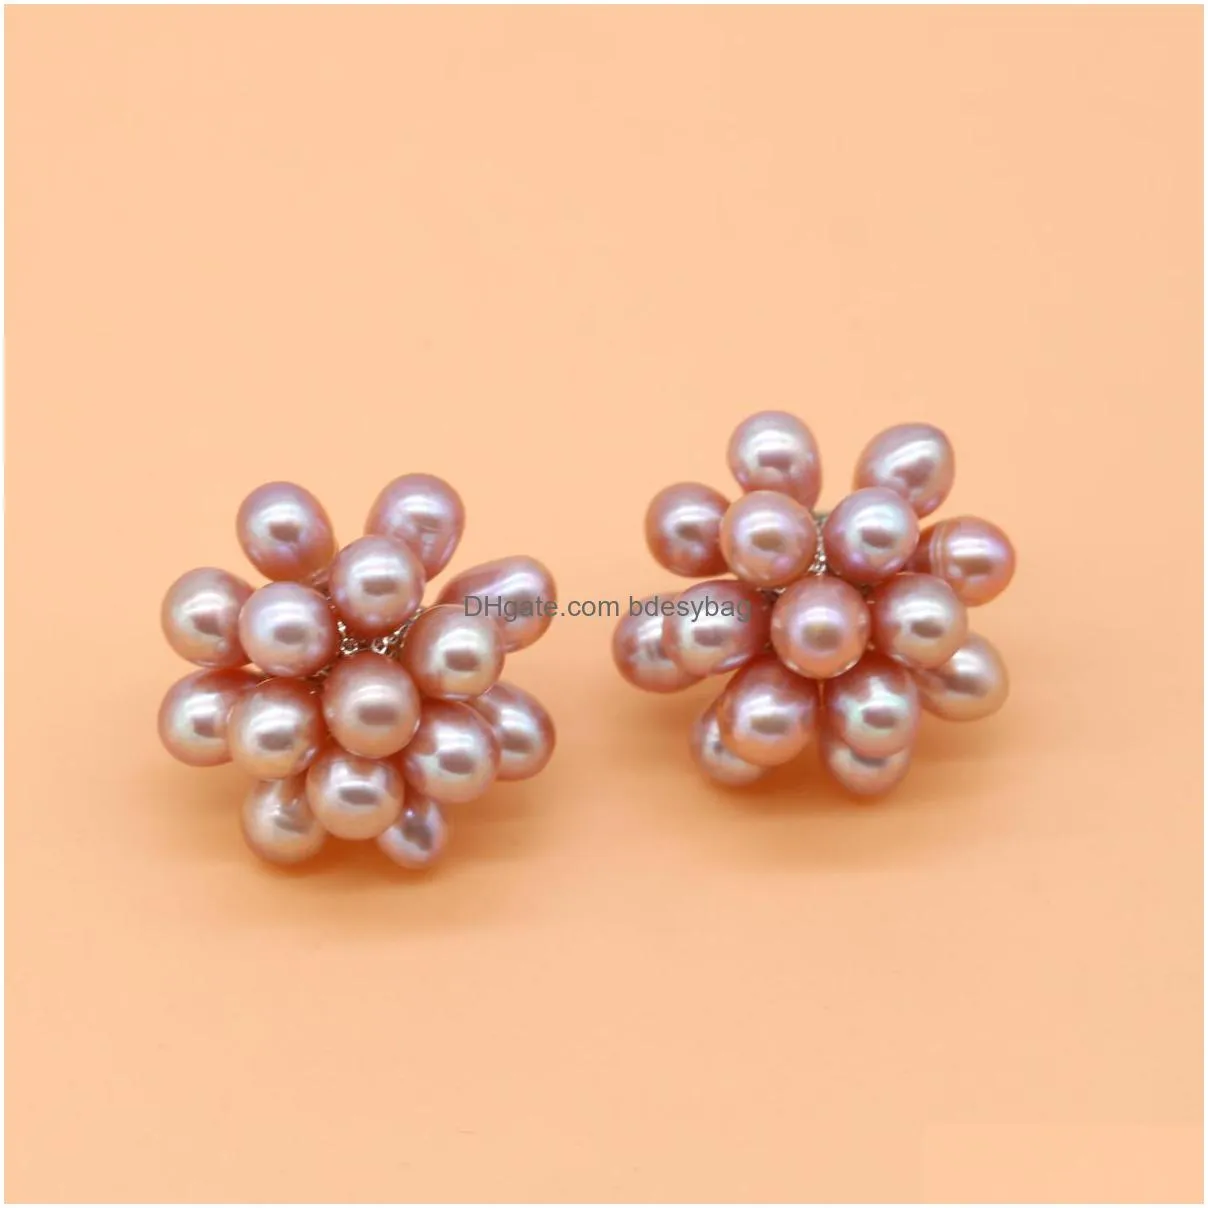 5 pairs rice pearl cluster stud earring freshwater pearls earrings natural fashion women jewelry love wish best gift